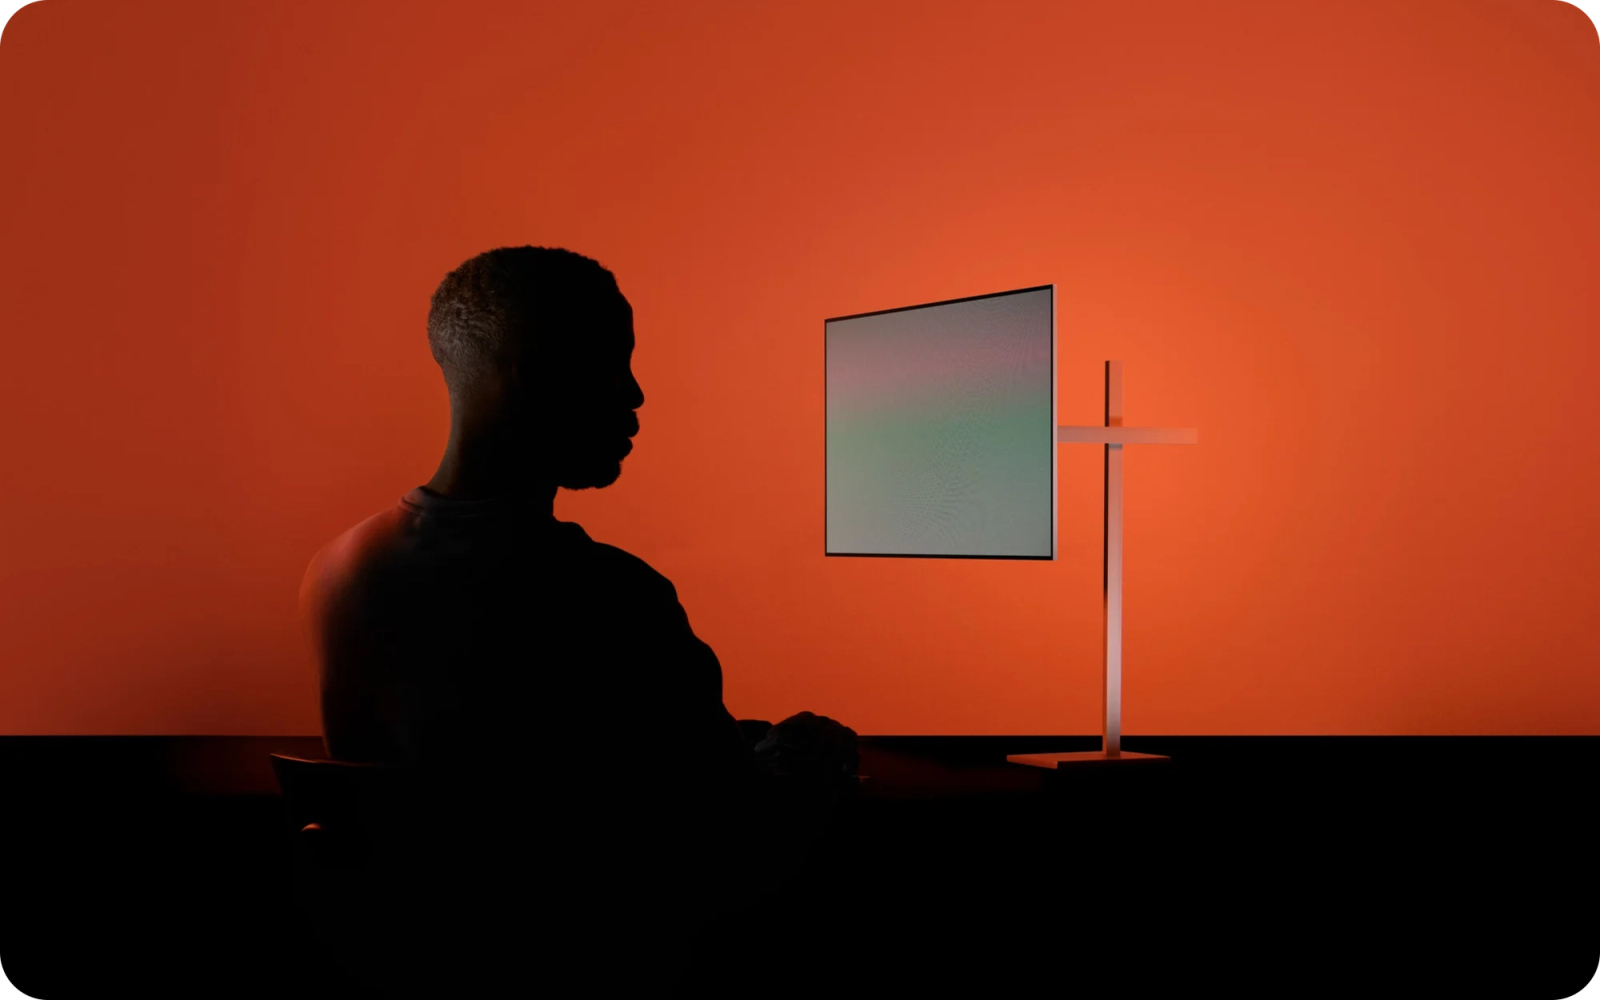 Silhouette of a person facing a computer monitor on an orange background